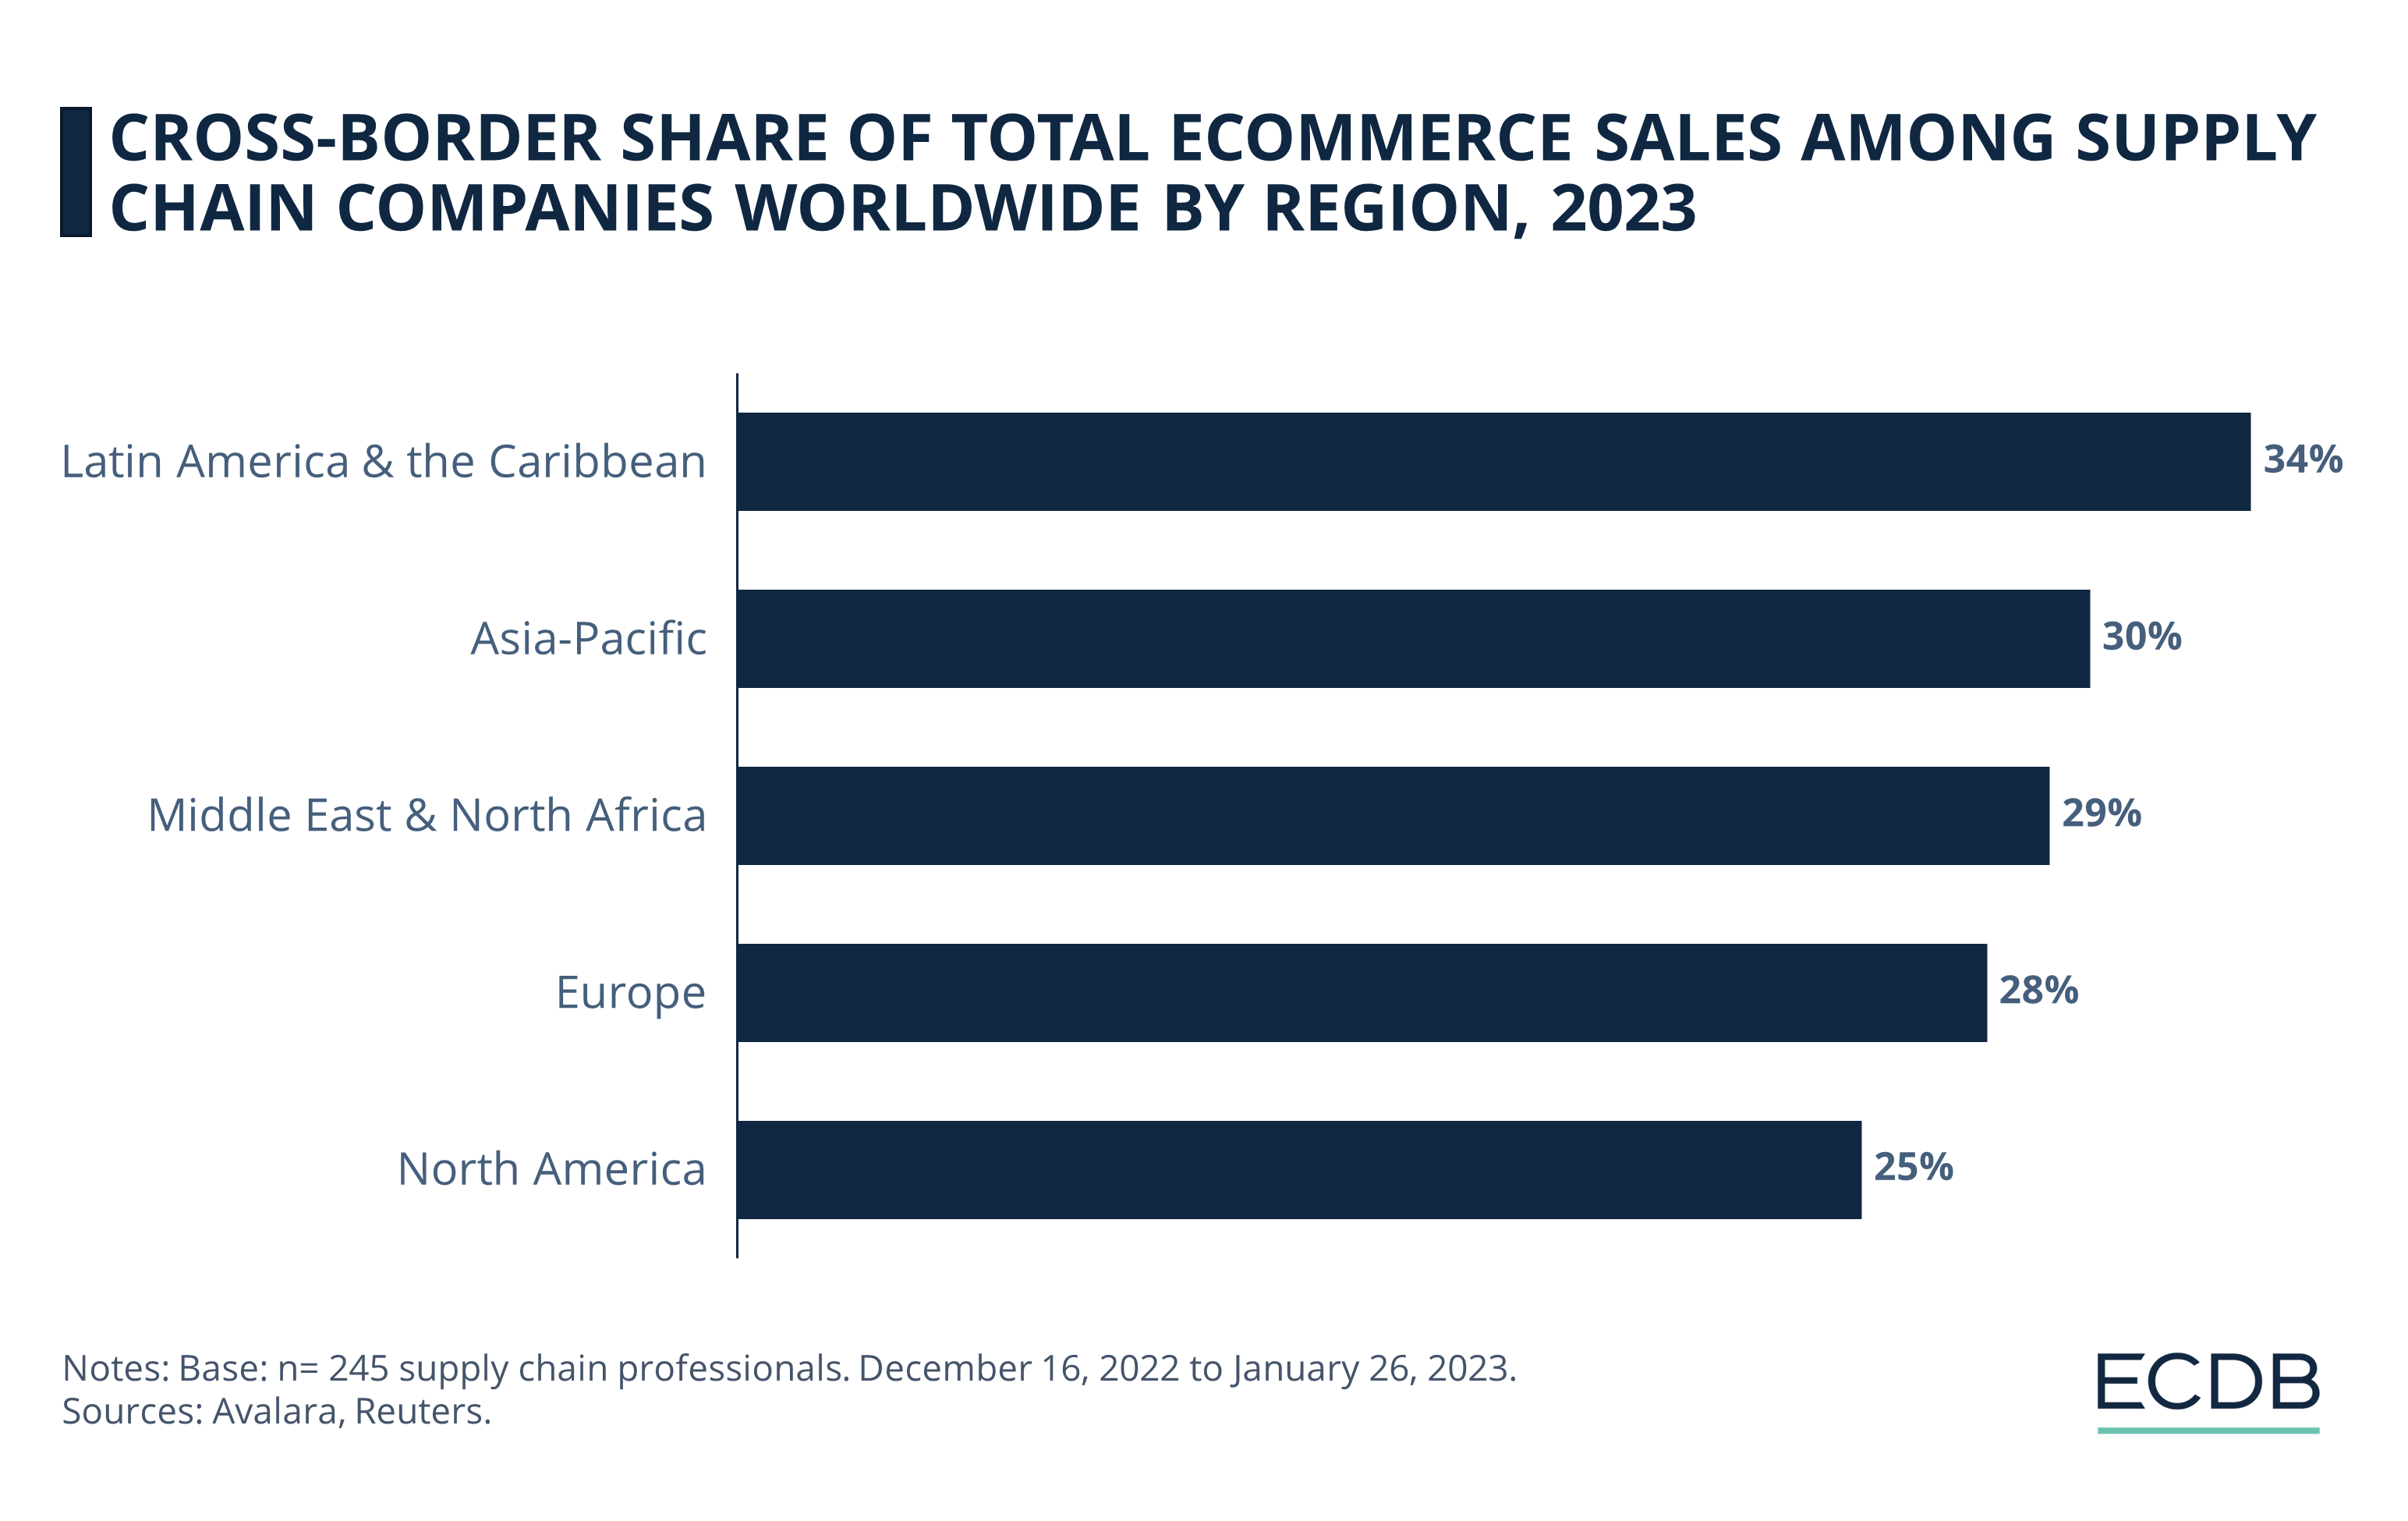 Cross-Border Share of Total eCommerce Sales Among Supply Chain Companies Worldwide by Region, 2023